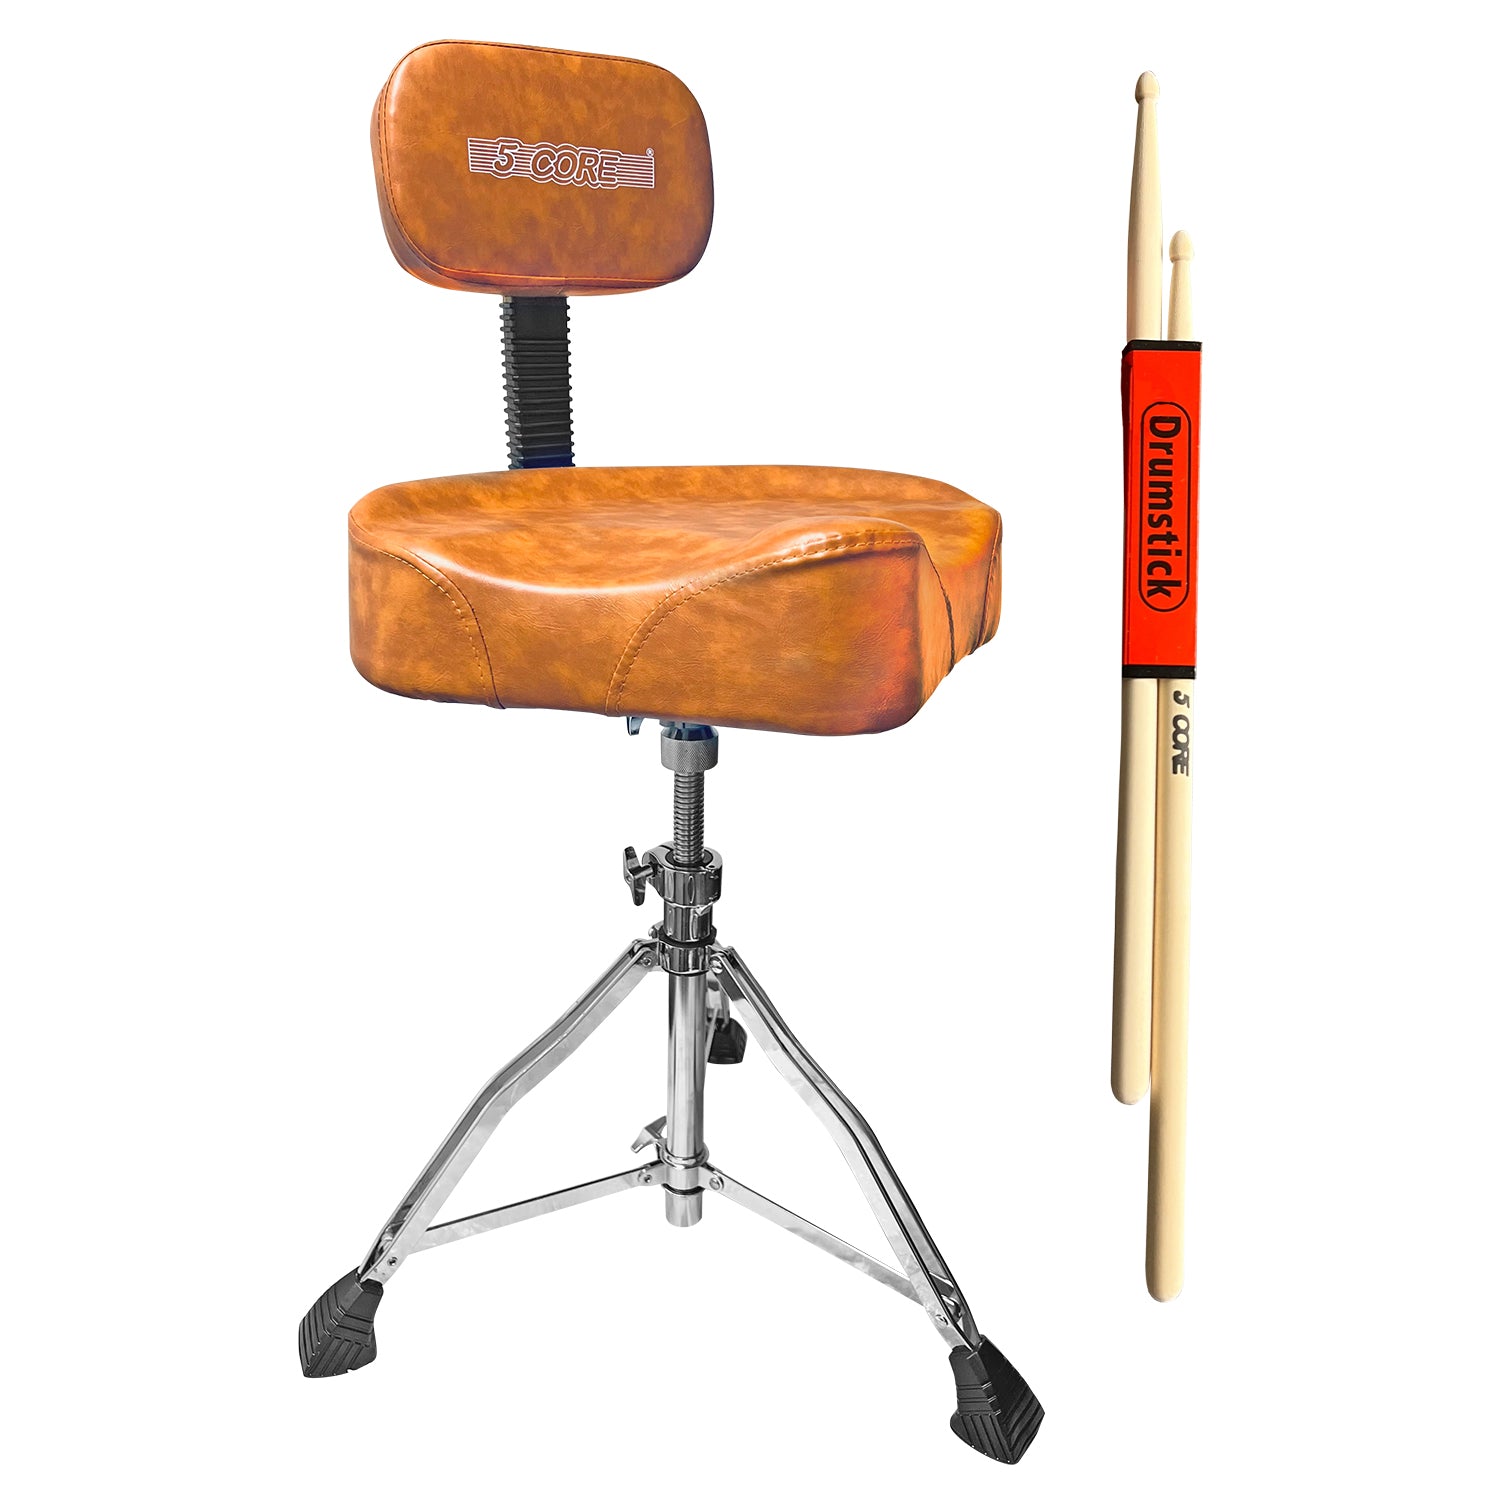 5 Core Drum Throne with Backrest Brown• Height Adjustable Comfortable Guitar Stool Motorcycle Style Seat